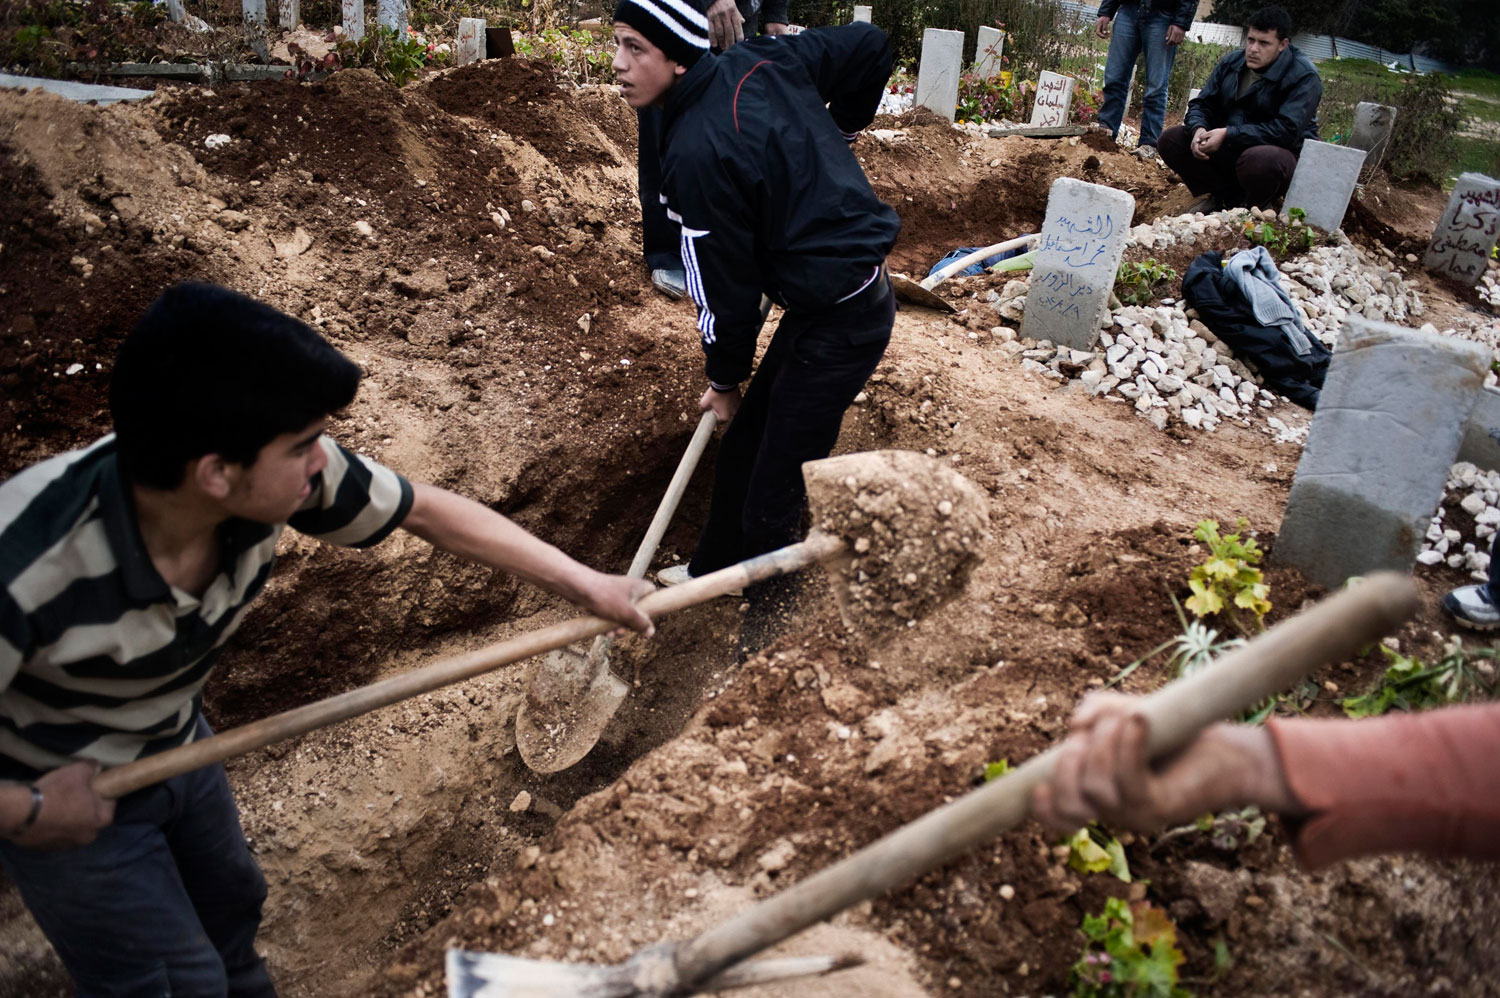 Feb. 14, 2012. A Syrian man (center) digs the grave for his father who, along with two other men, was kidnapped, then killed by the shabiha, in al-Qsair.